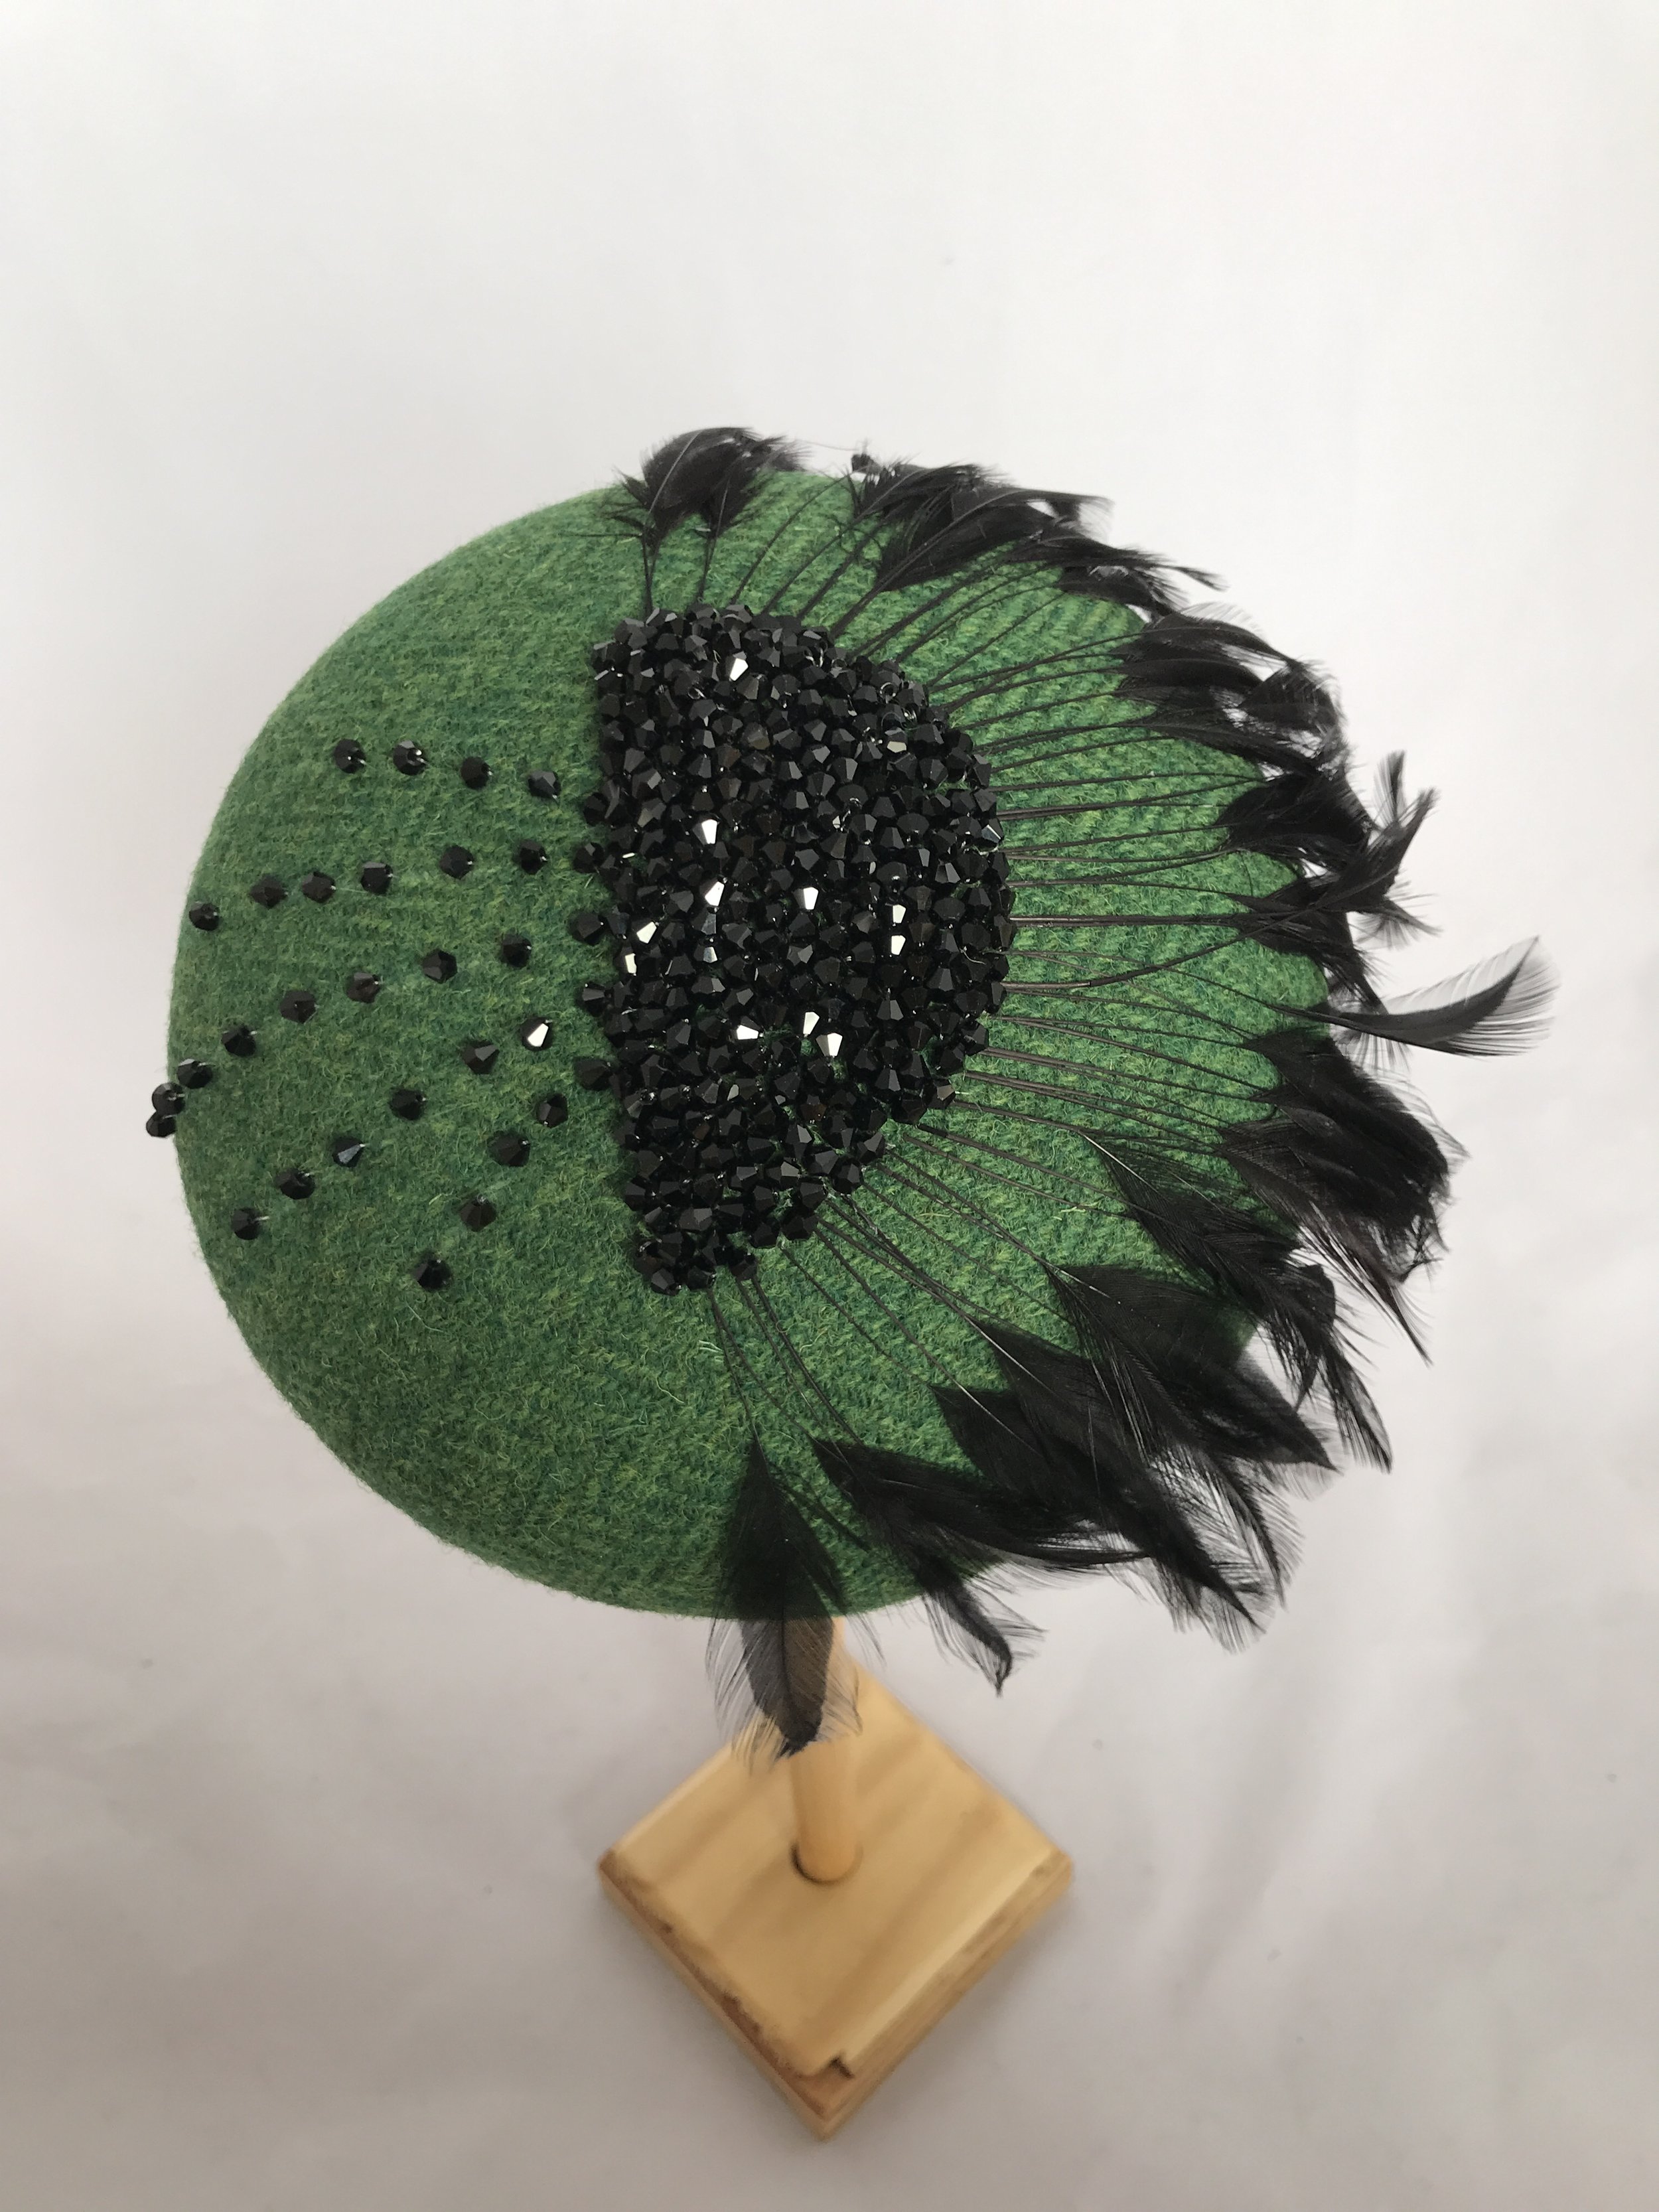 Agatha - green Harris Tweed with black crystals and feathers